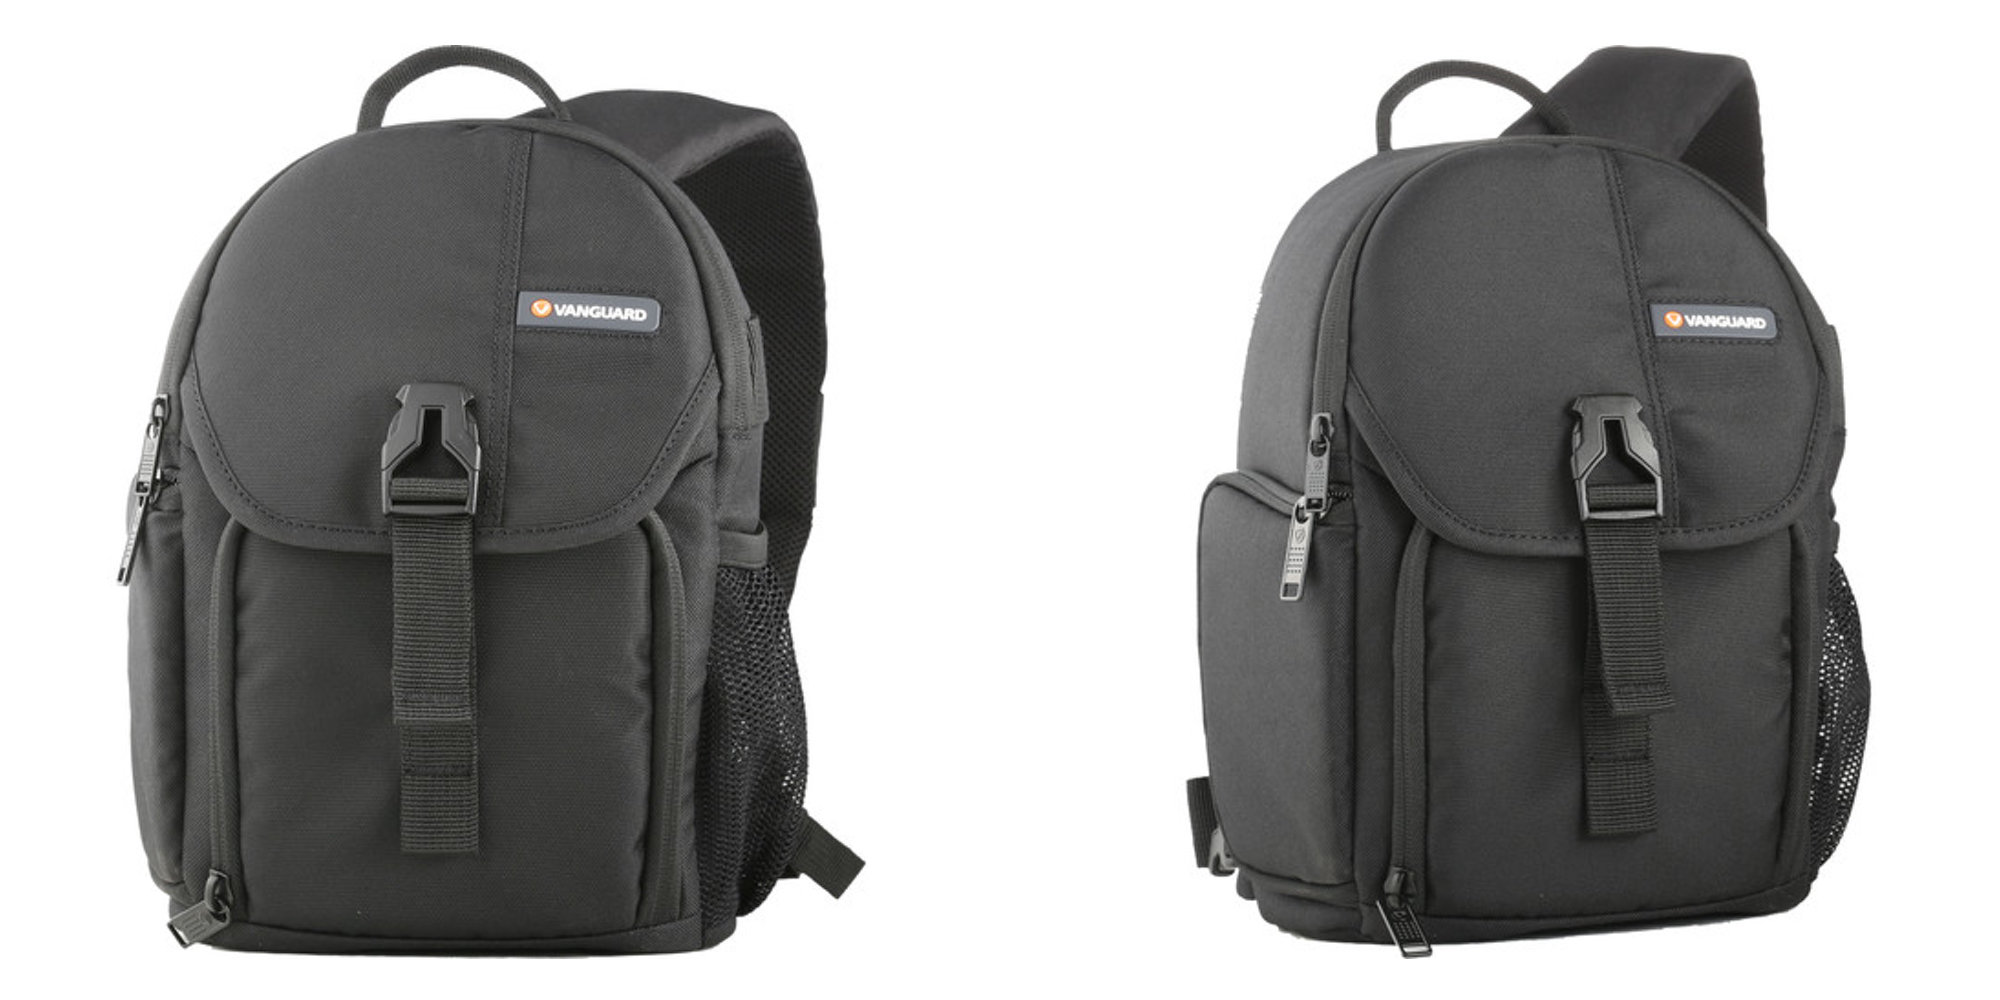 Carry your photography gear in Vanguard&#39;s $20 DSLR Sling Bag ($15 off) - 9to5Toys